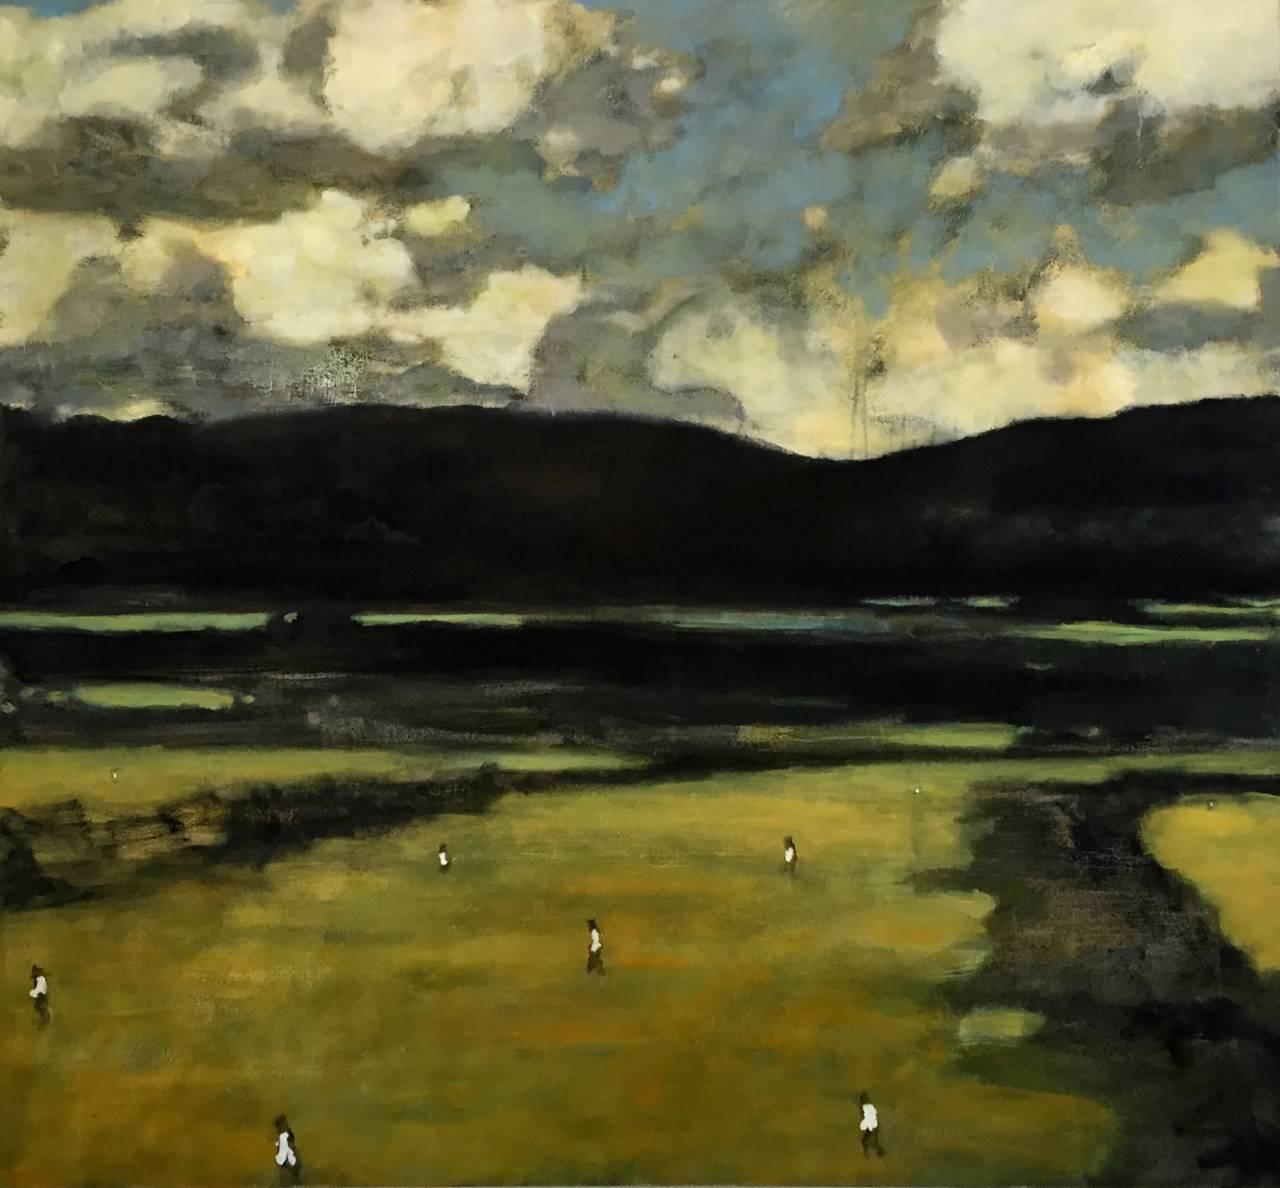 Oil on canvas
48 x 52 x 1.5 inches
This listing is available from Carrie Haddad Gallery, based in Hudson, NY.

Ivory clouds loom over the distant Catskill Mountains; meanwhile in the foreground, minuscule white figures scatter across a green